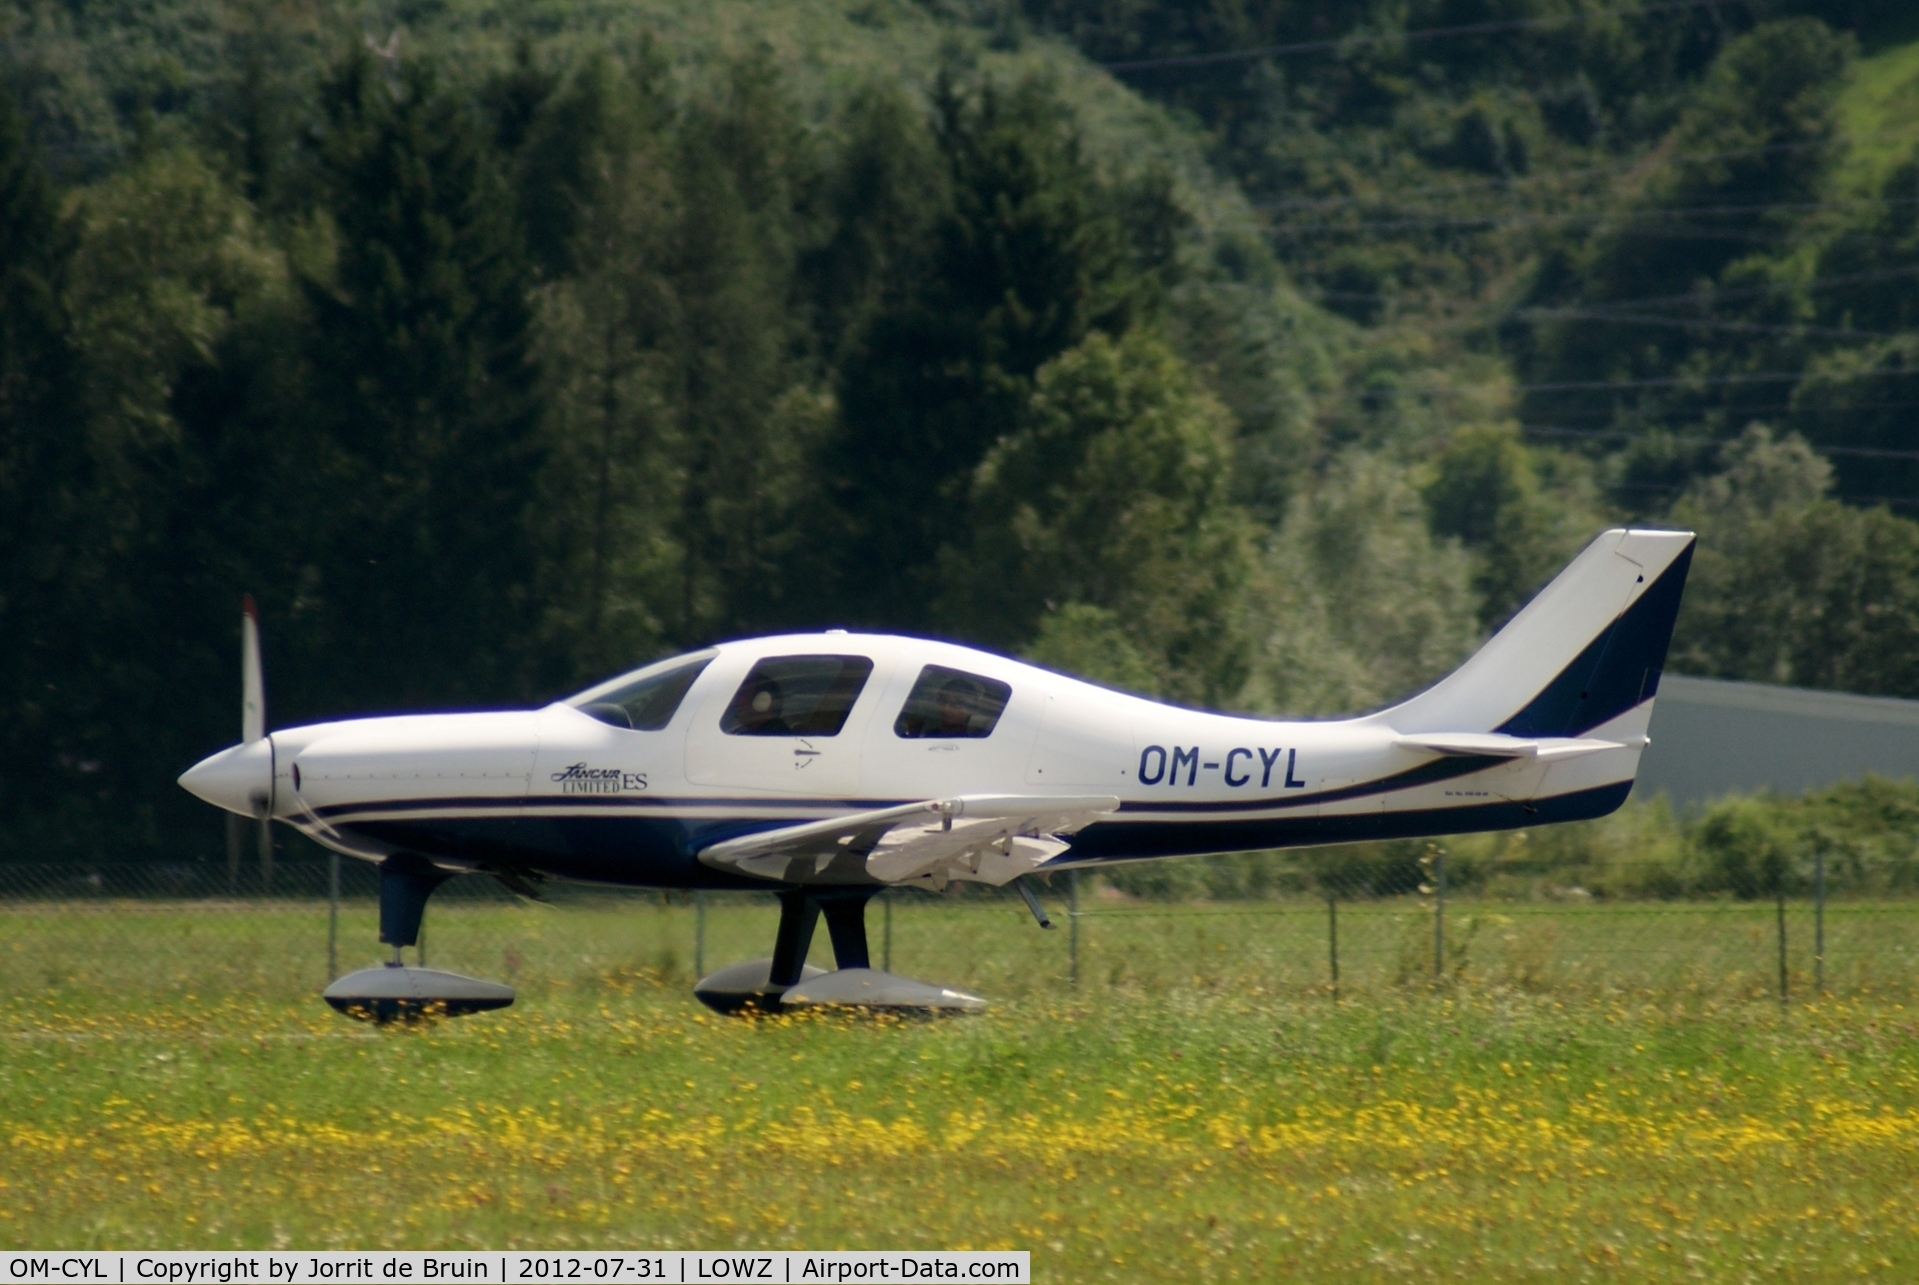 OM-CYL, Lancair ES C/N 046-08-96, The landing of a Slovenian Lancair on runway 08 at Zell am See.